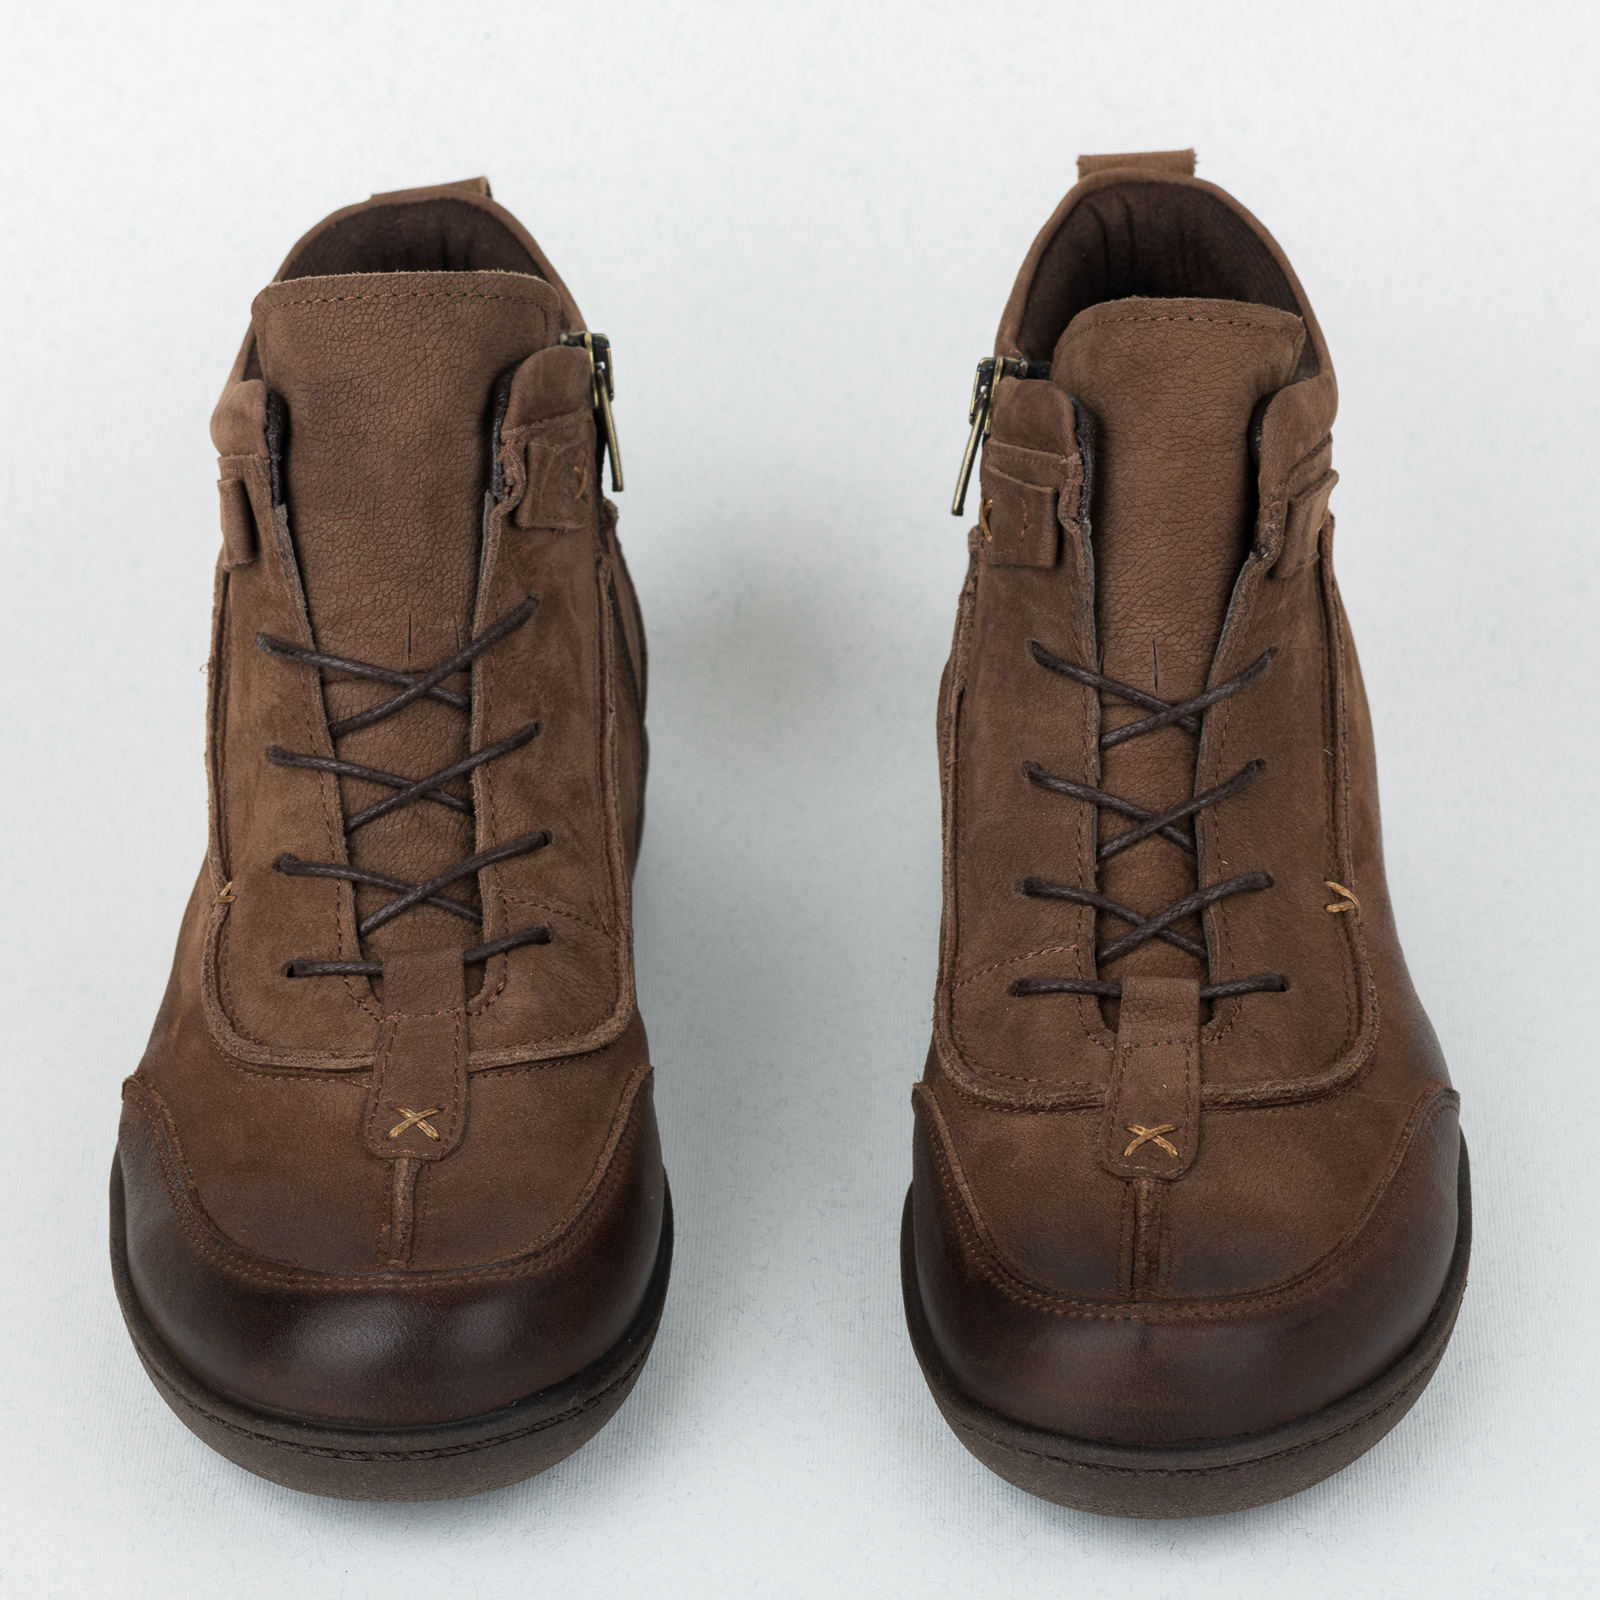 Leather ankle boots B631 - BROWN